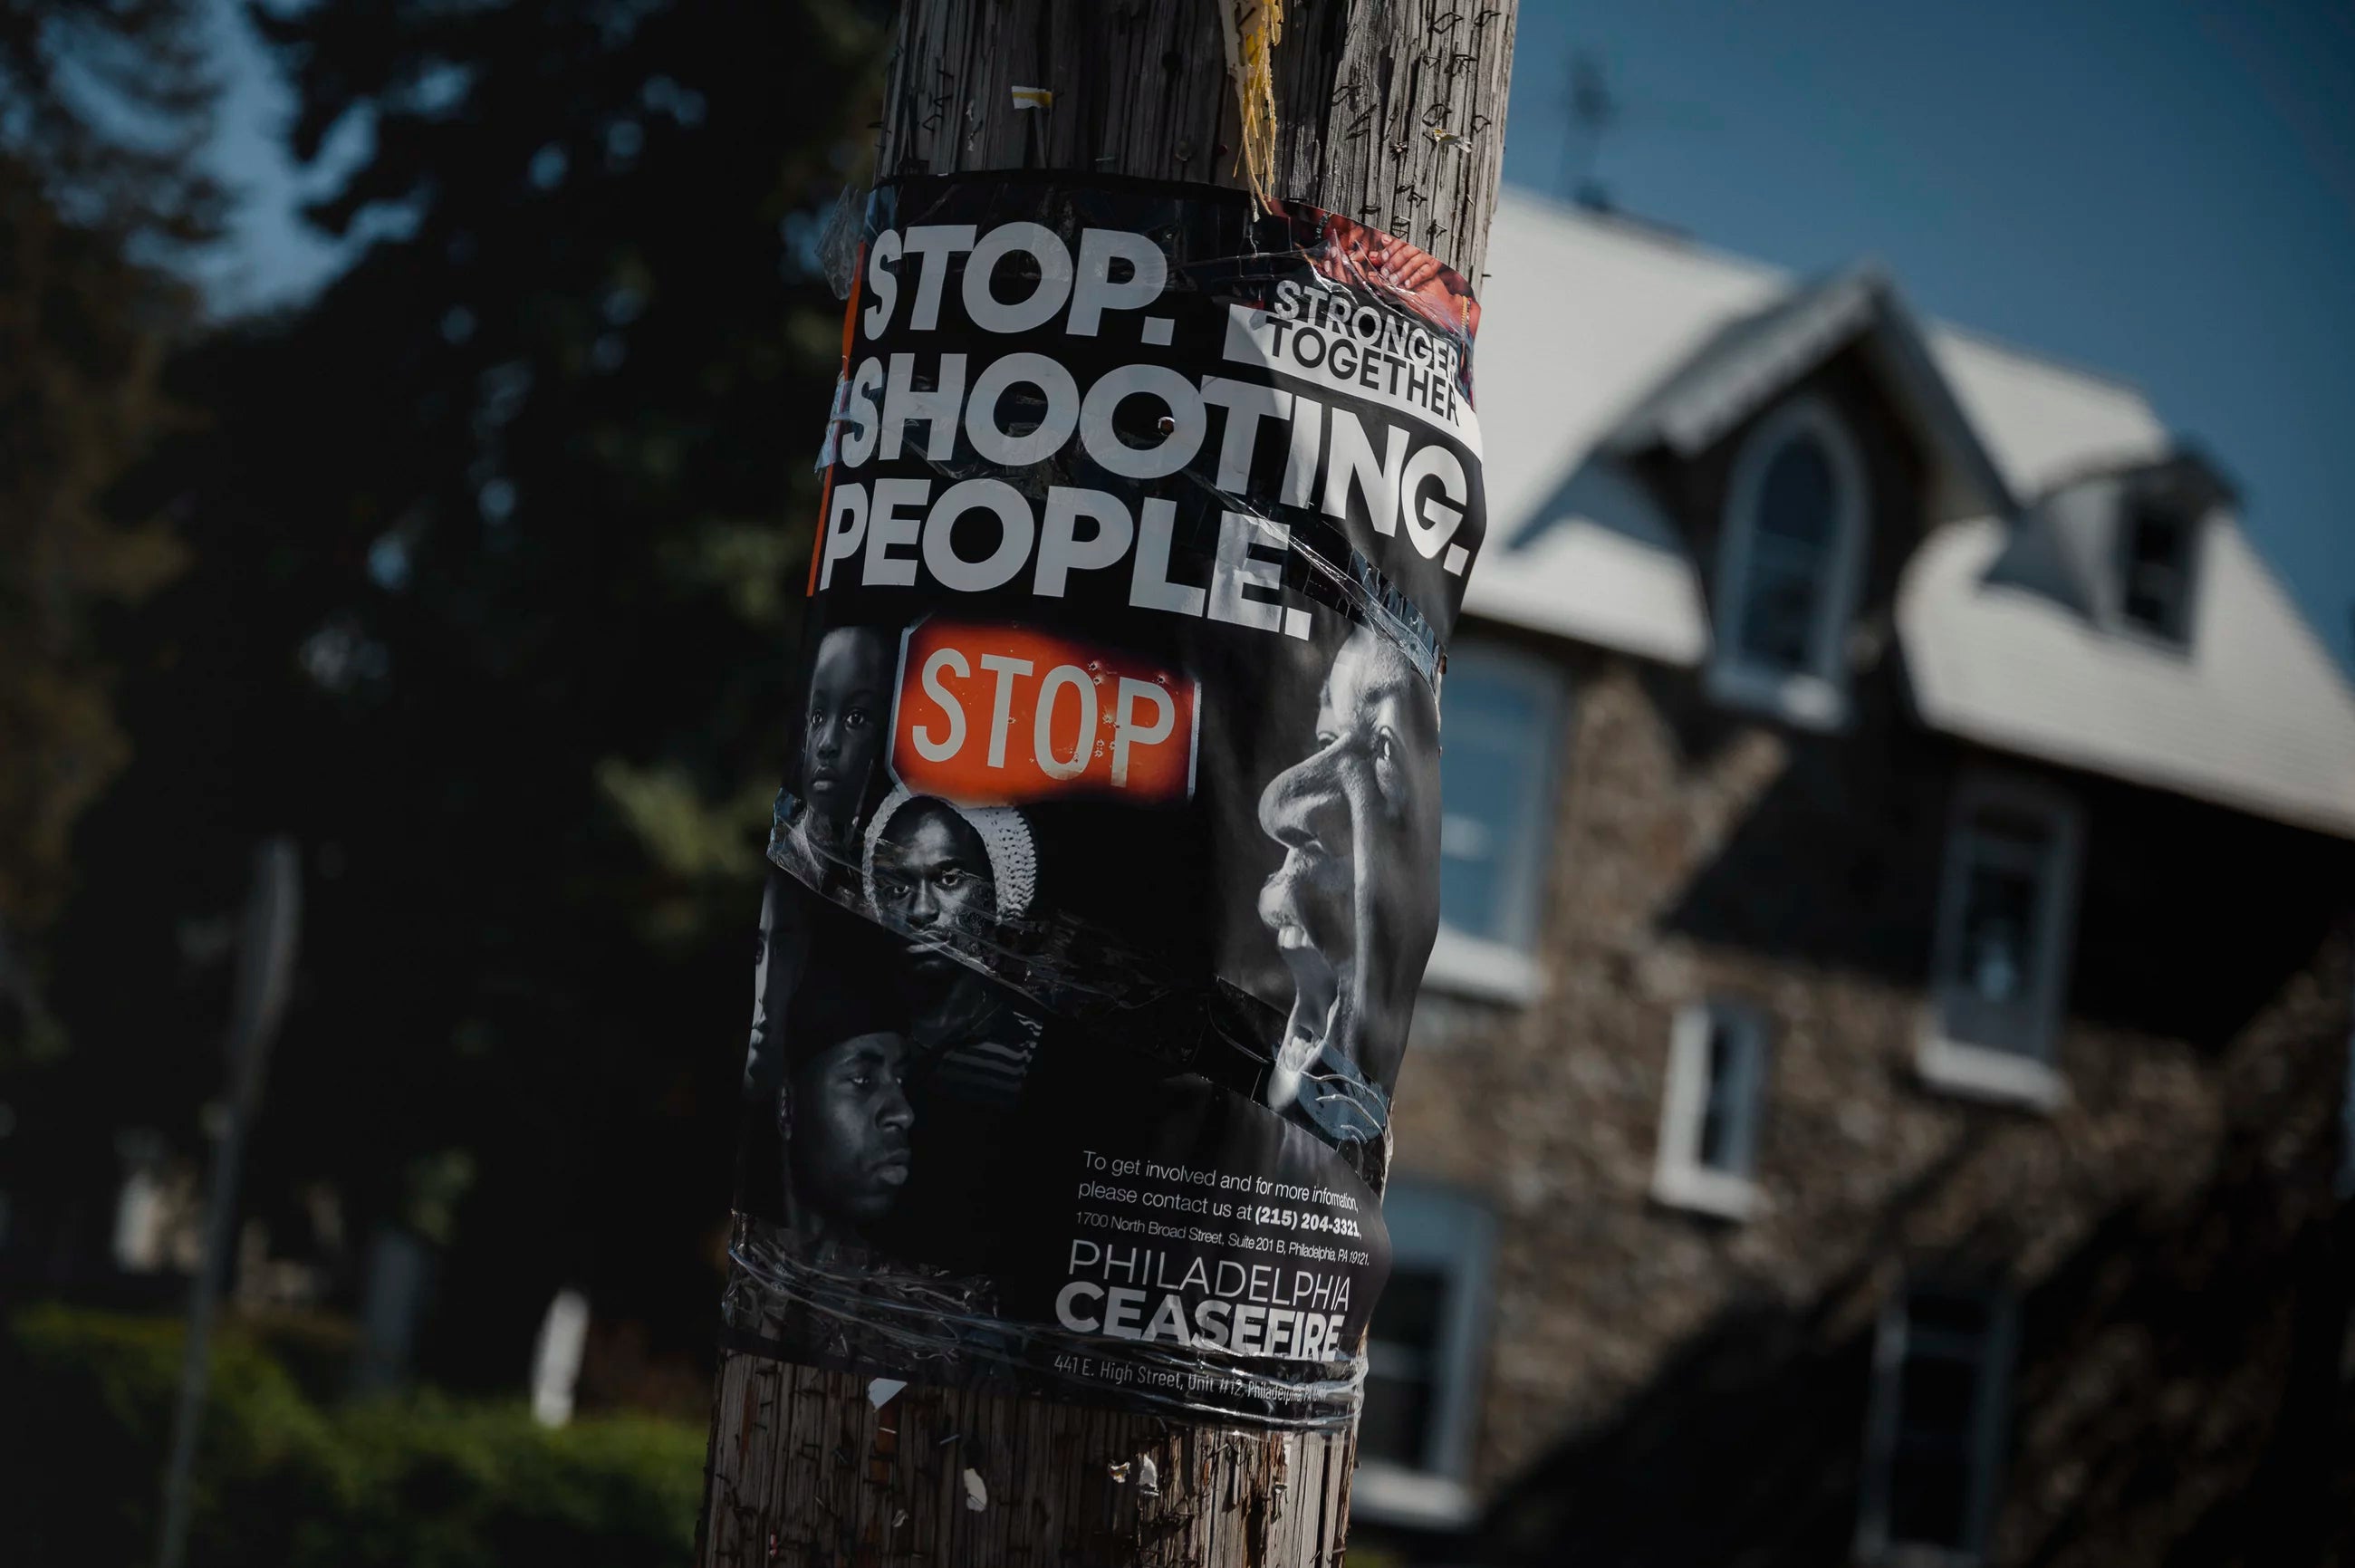 A "Stop. Shooting. People." flyer by Philadelphia Ceasefire